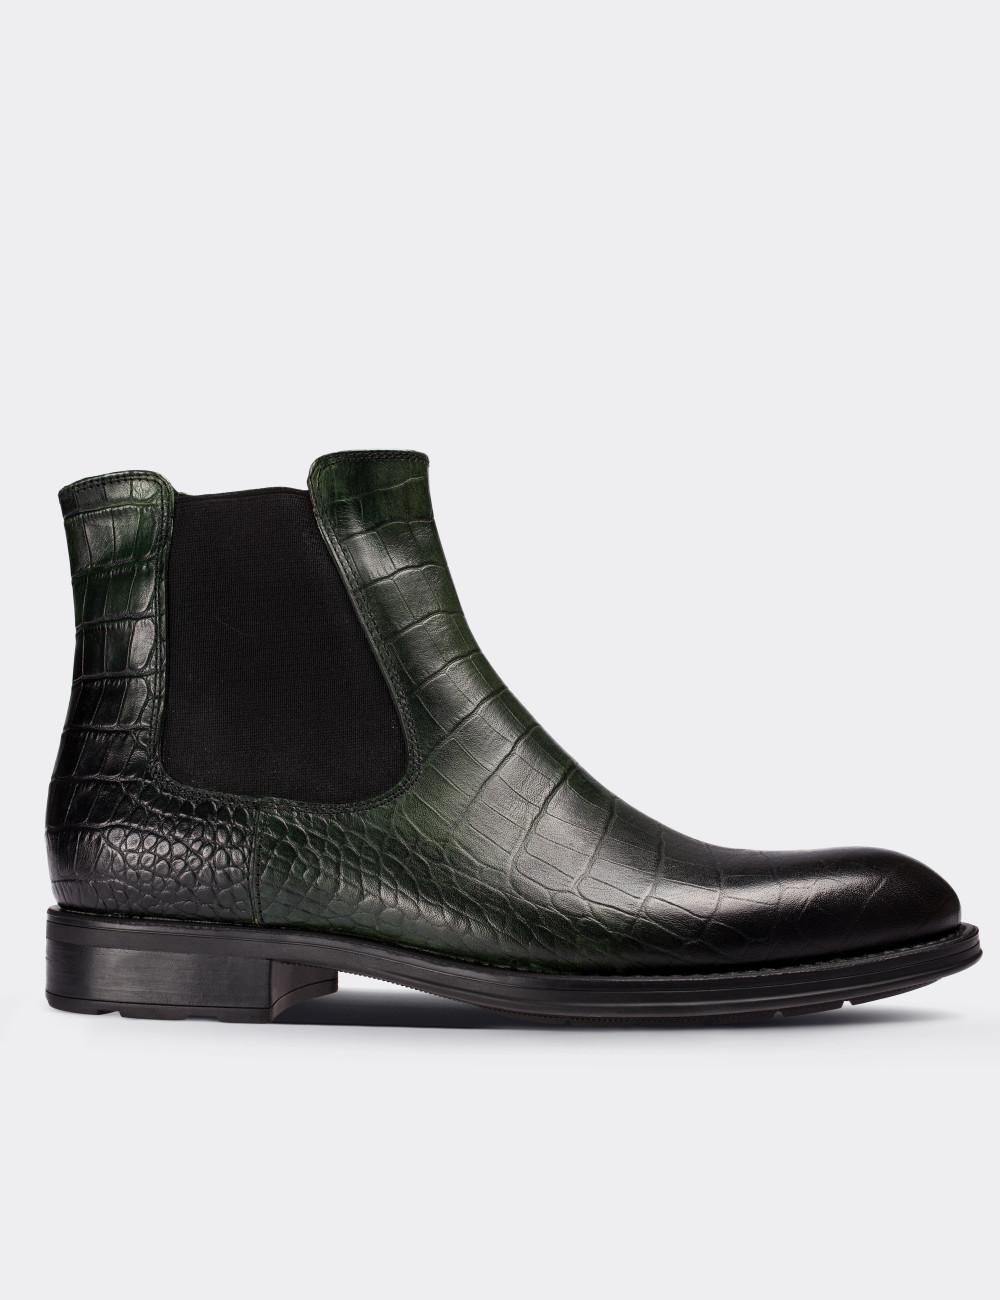 Green  Leather Chelsea Boots - 01620MYSLC02